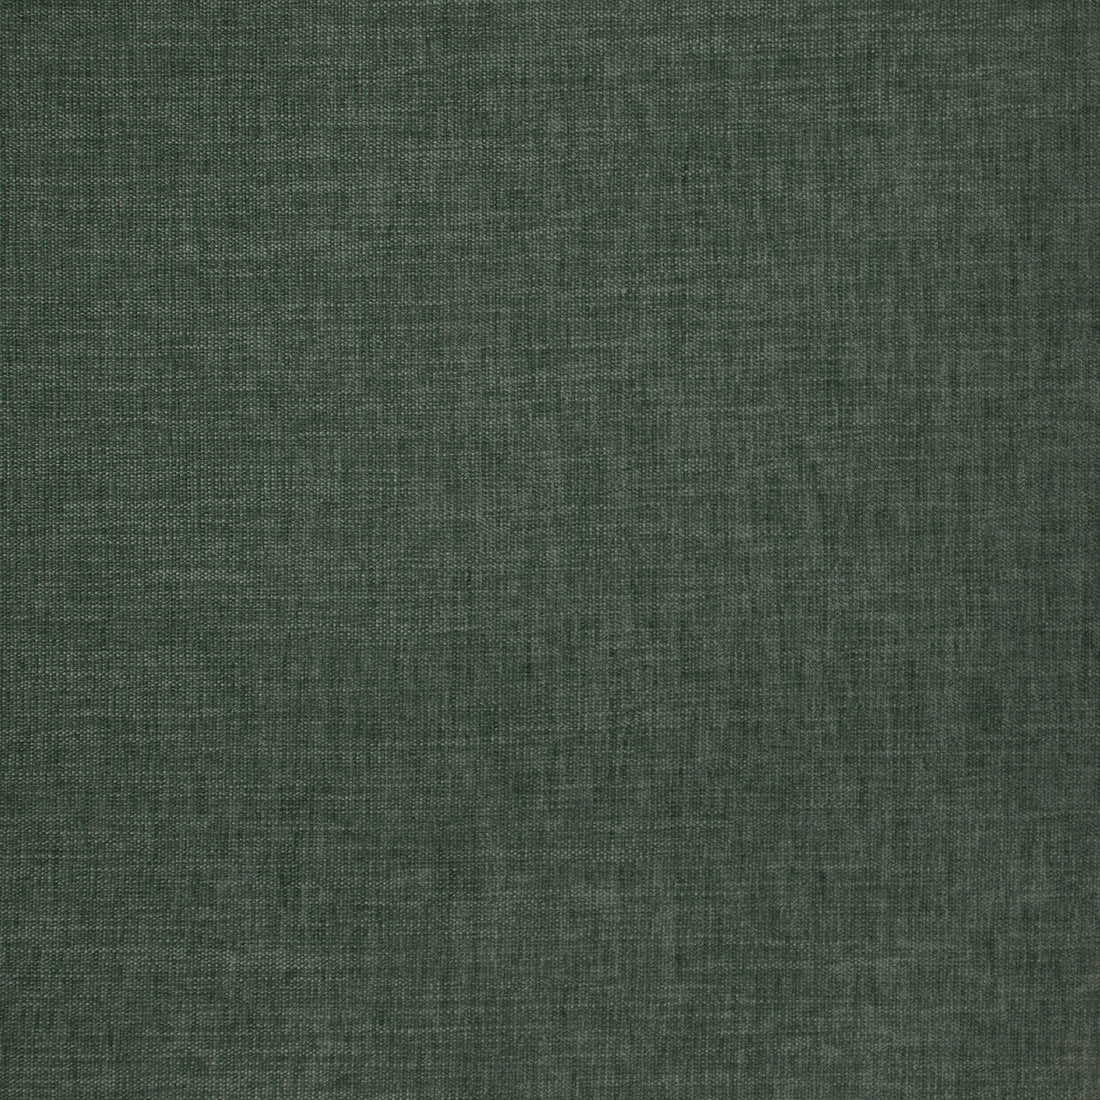 Moro fabric in verde oscuro color - pattern GDT5670.008.0 - by Gaston y Daniela in the Gaston Maiorica collection